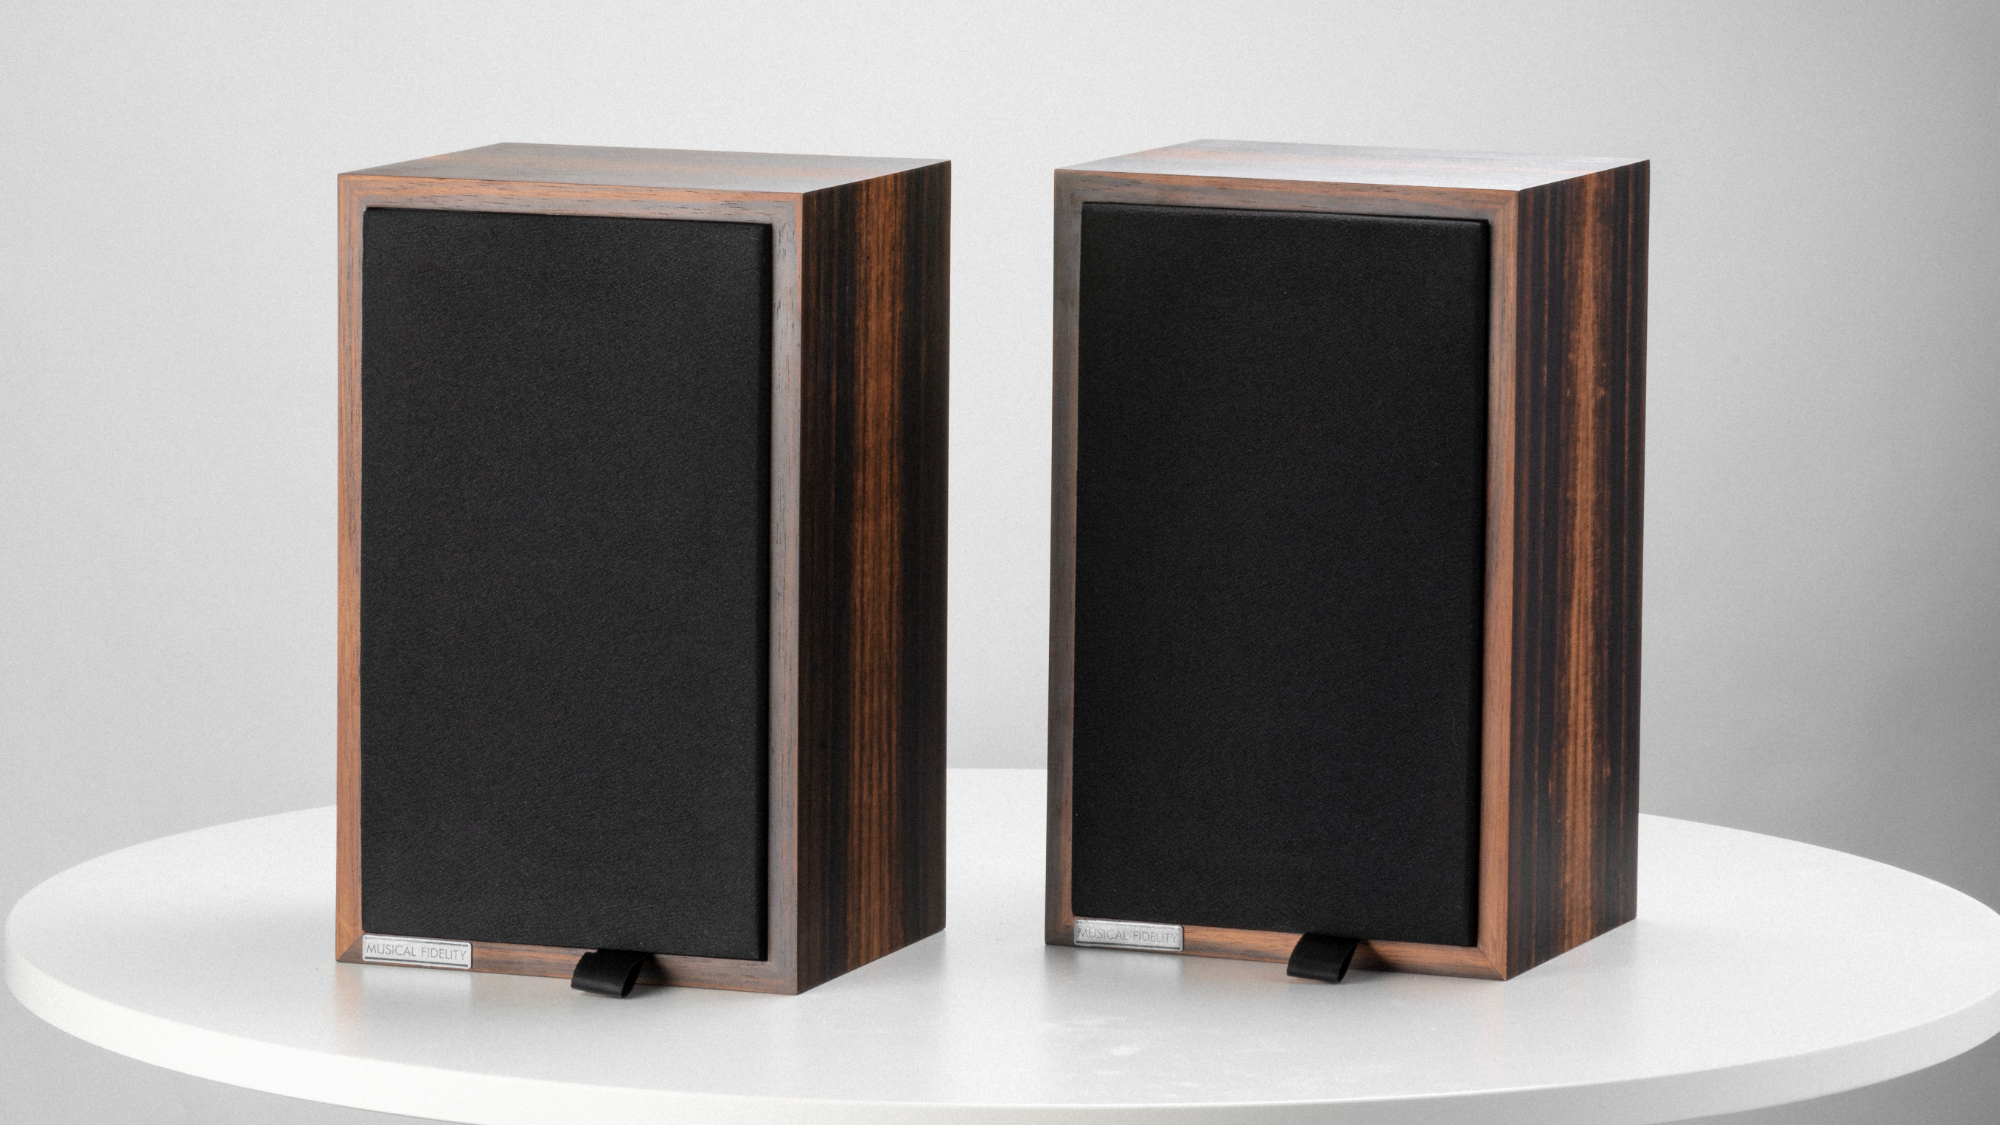 musical-fidelity-unveils-two-new-loudspeakers-based-on-the-bbc’s-original-designs